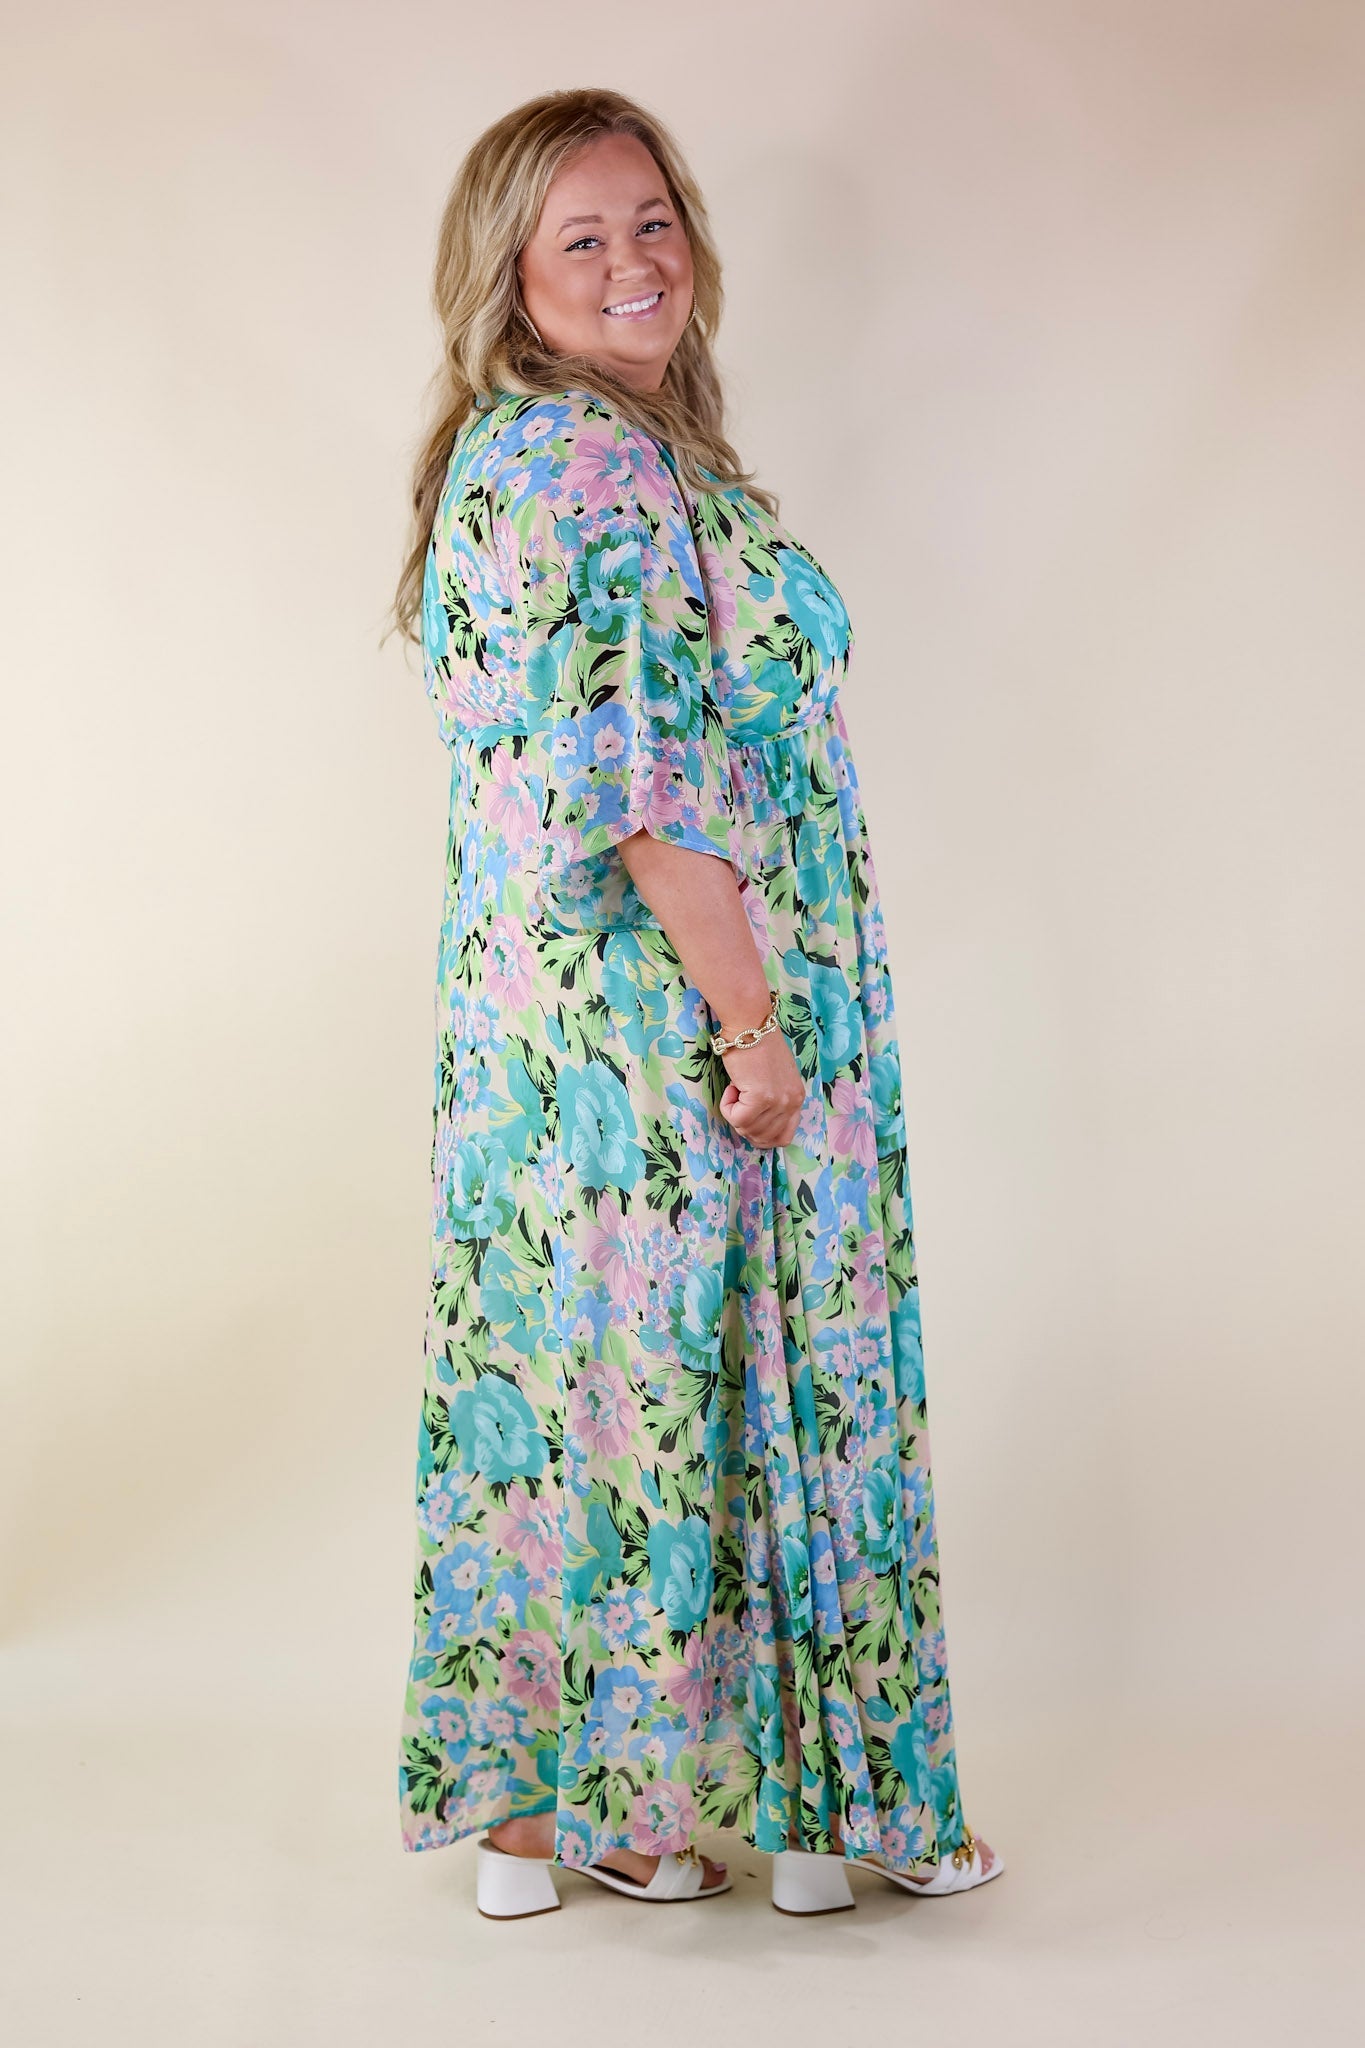 Beautifully Botanical V Neck Floral Print Maxi Dress in Blue and Green Mix - Giddy Up Glamour Boutique